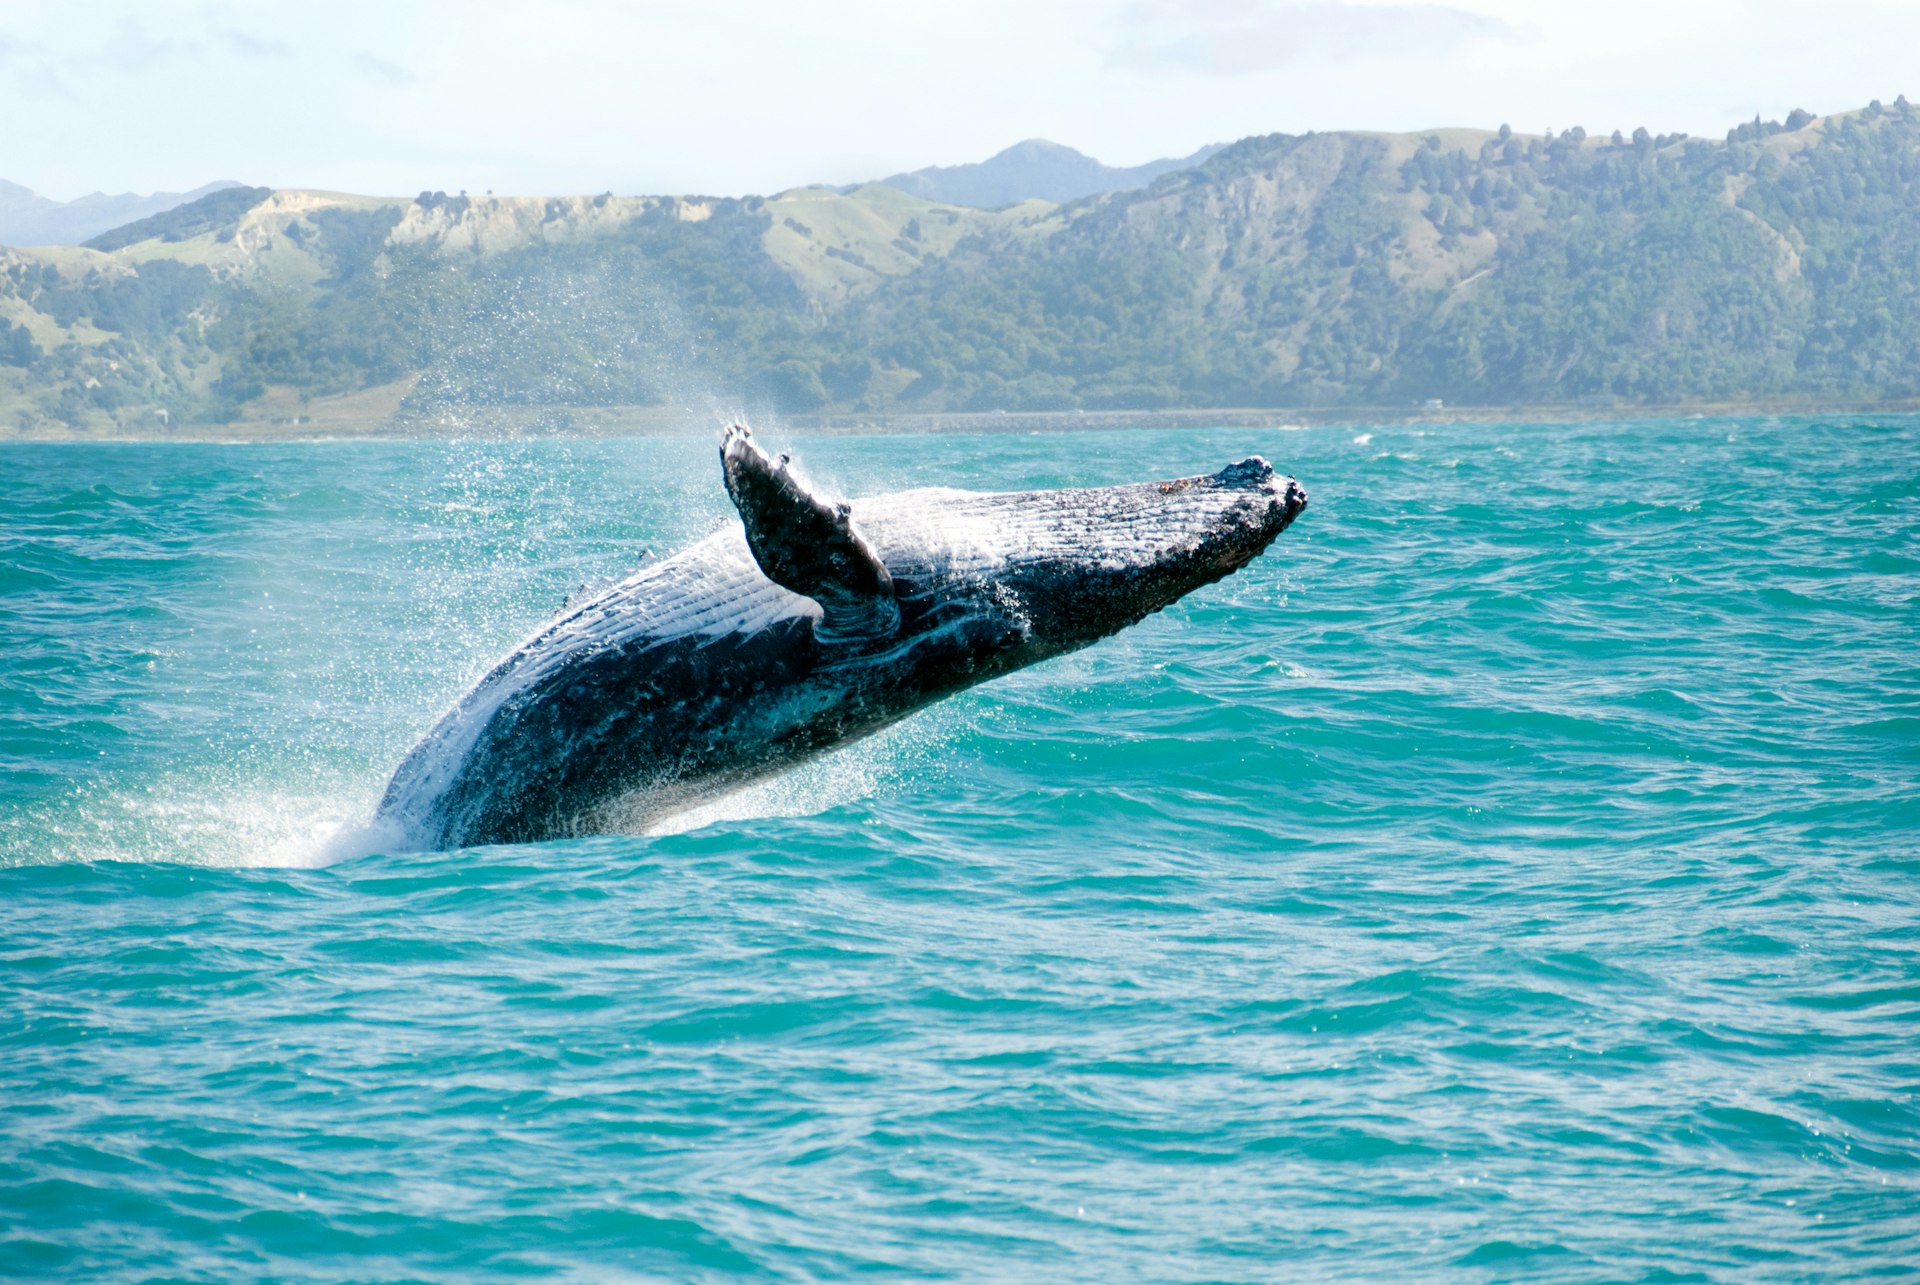 A massive humpback whale leaps from the water